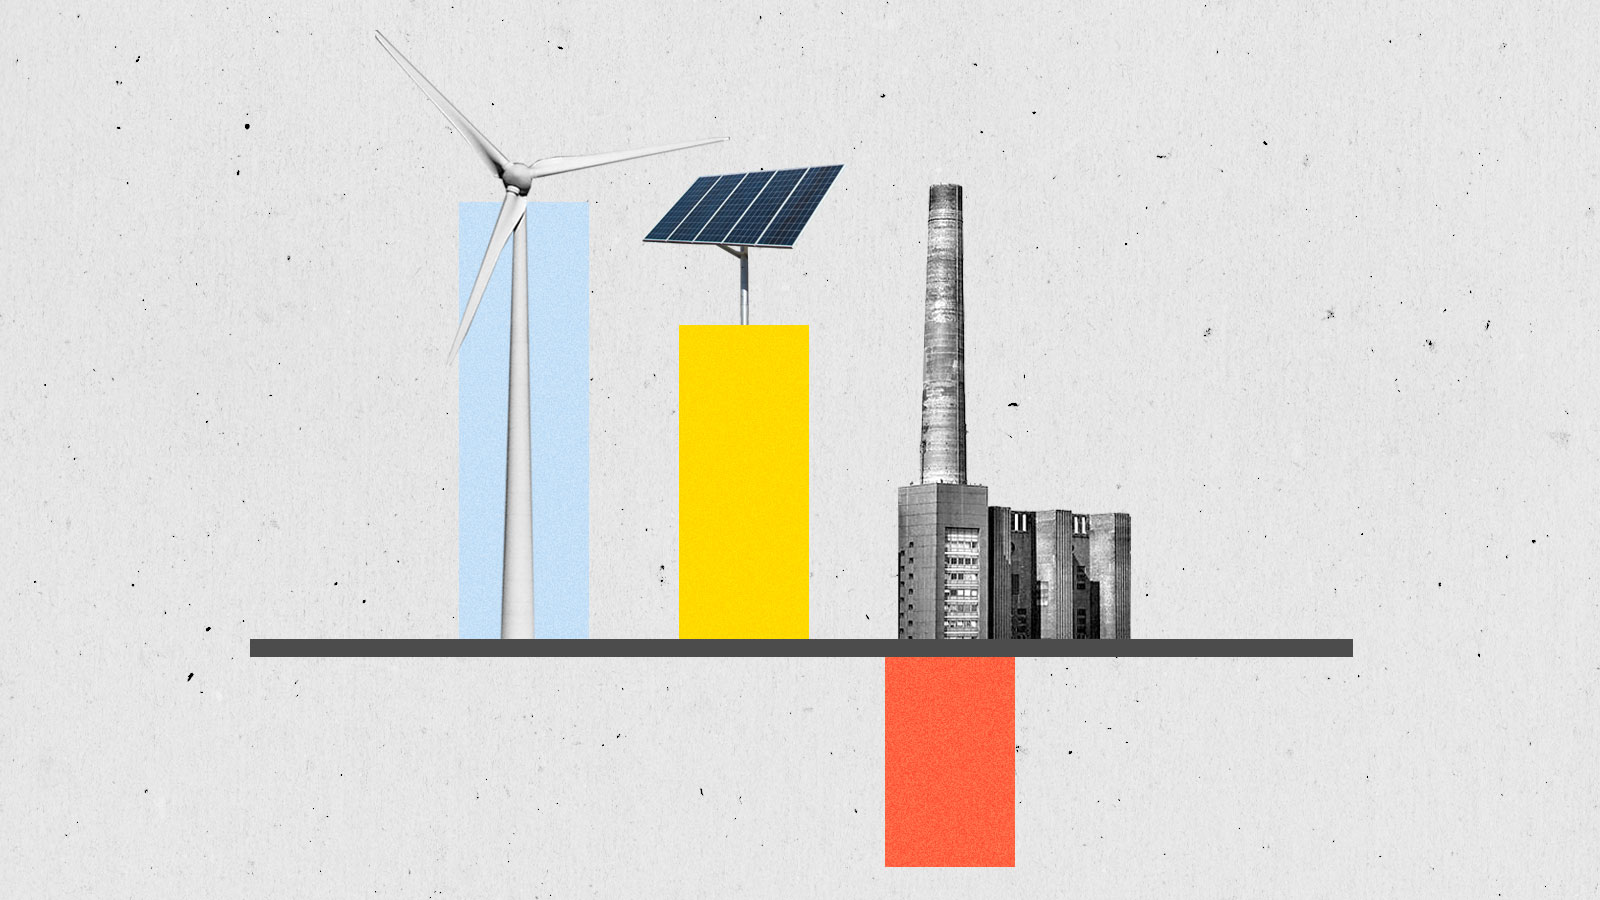 Collage of bar graphs; one with a wind turbine on top, one with a solar panel on top, and the third bar placed underneath a smokestack